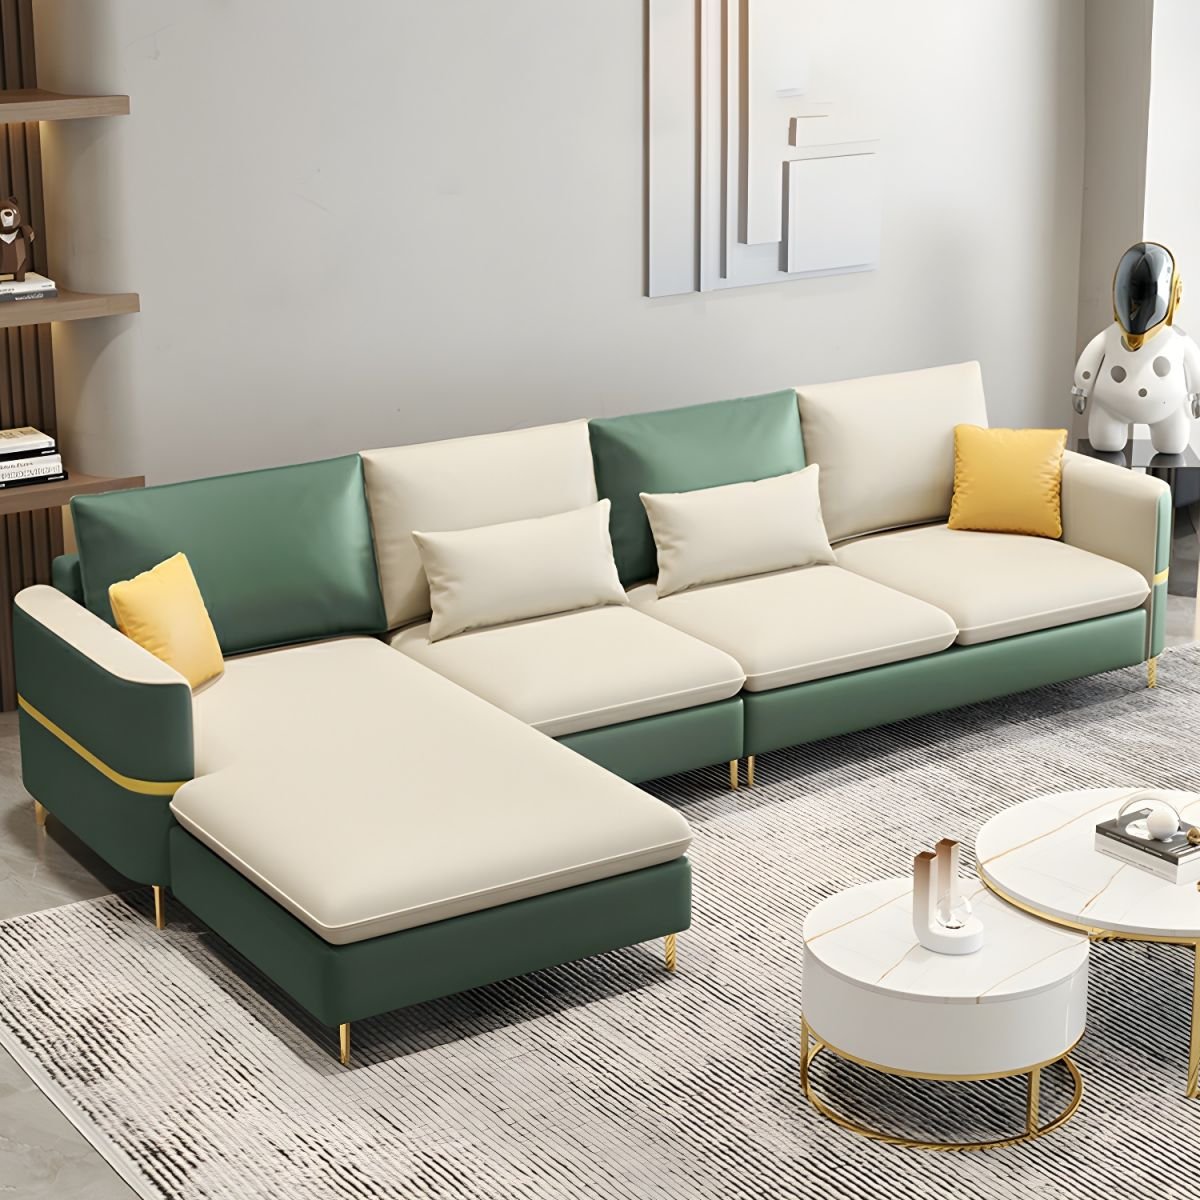 Glam Tech Cloth U-Shape Stationary Sectional Sofa Chaise in 2 Piece Set - Left Tech Cloth Blackish Green/ Beige Latex & Down